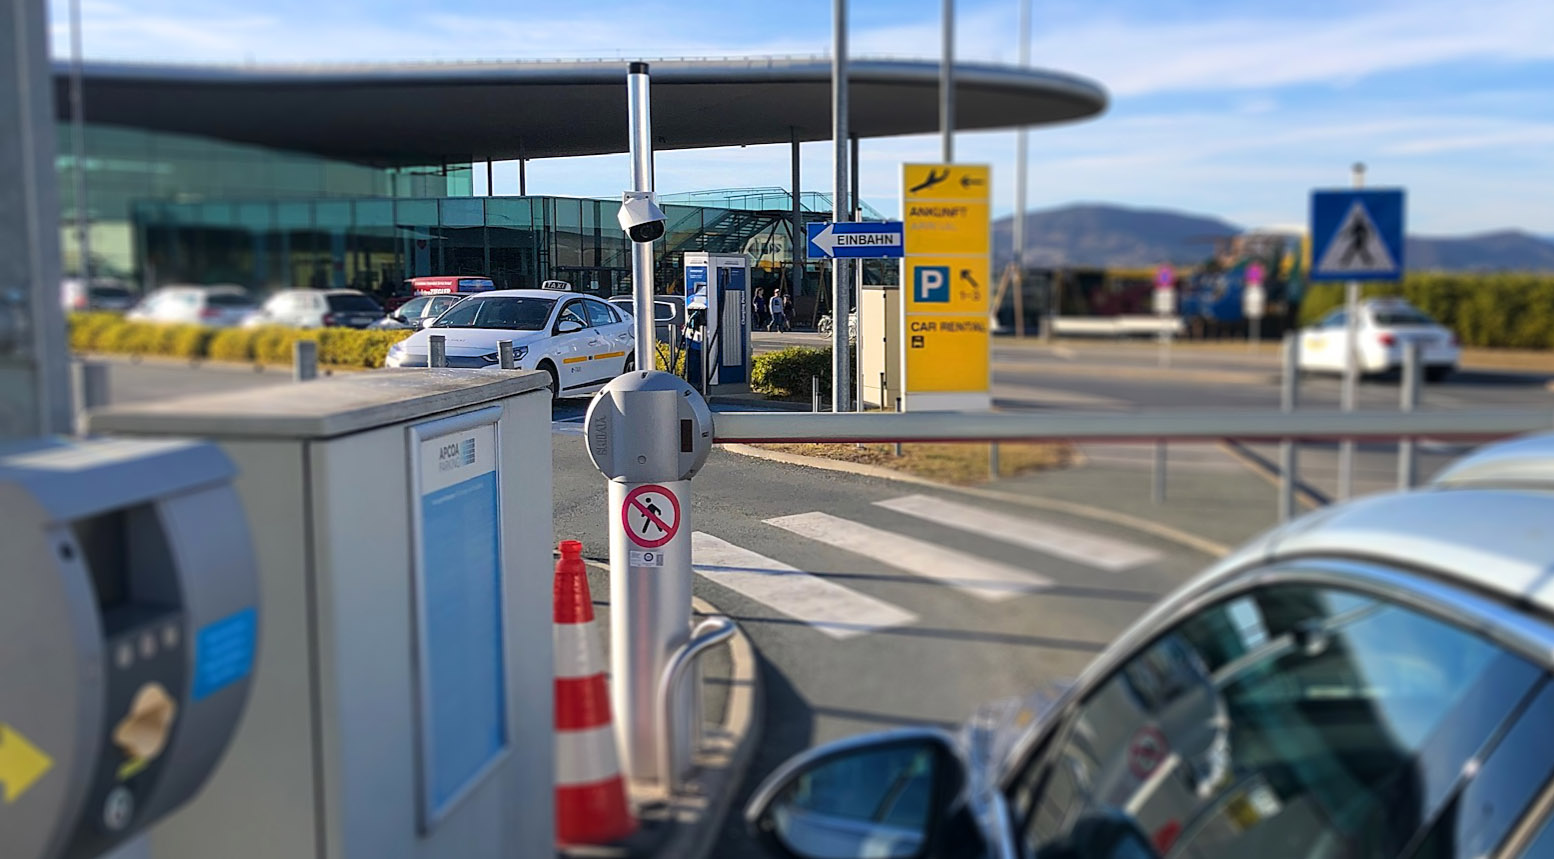 APCOA PARKING & Arivo have transformed the parking experience at Graz Airport